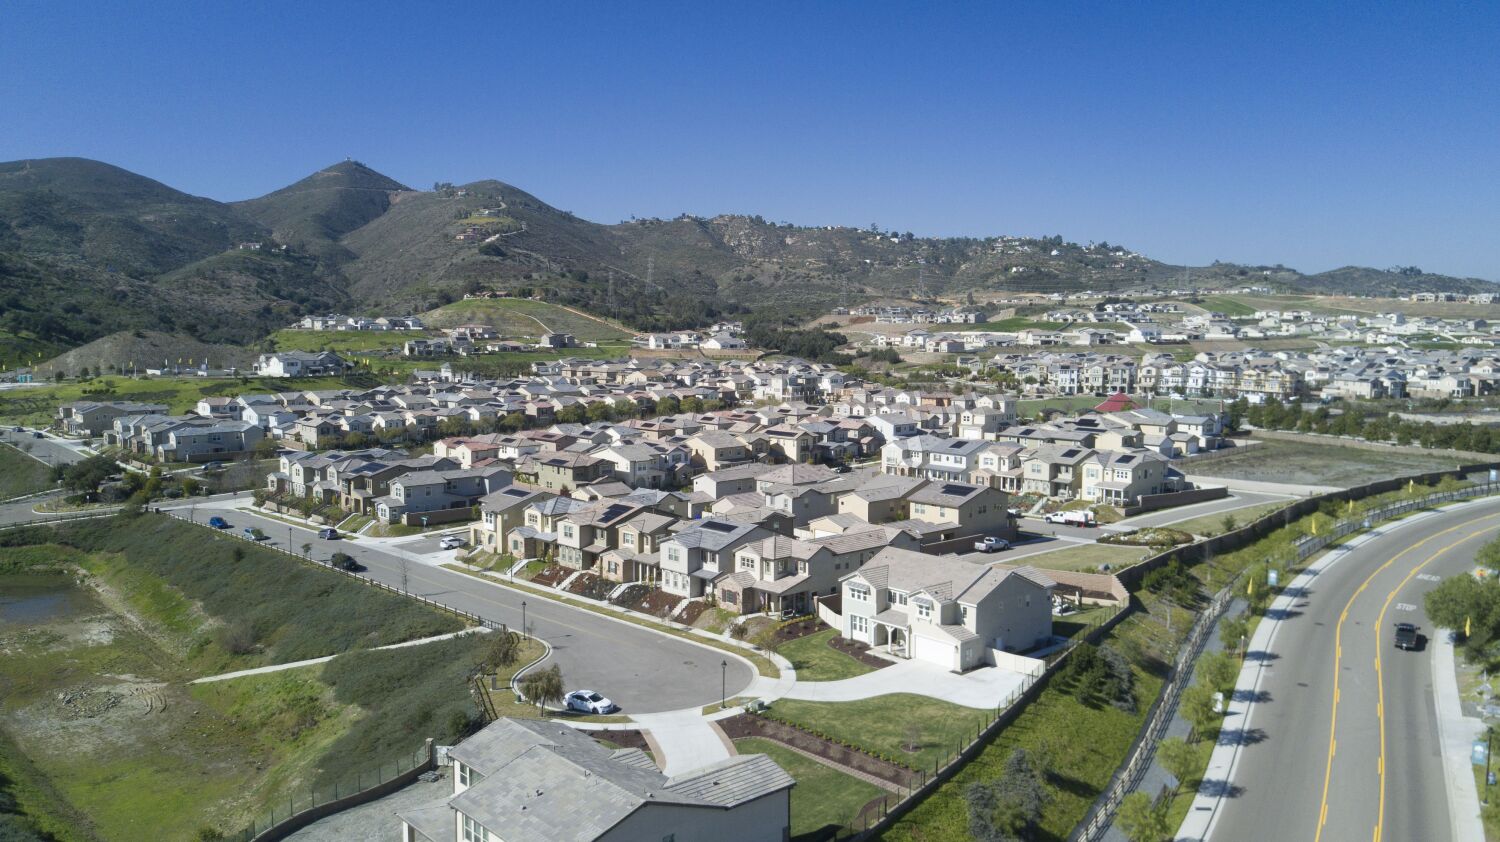 Opinion: California housing development remains abysmal despite reforms. Here's what's missing